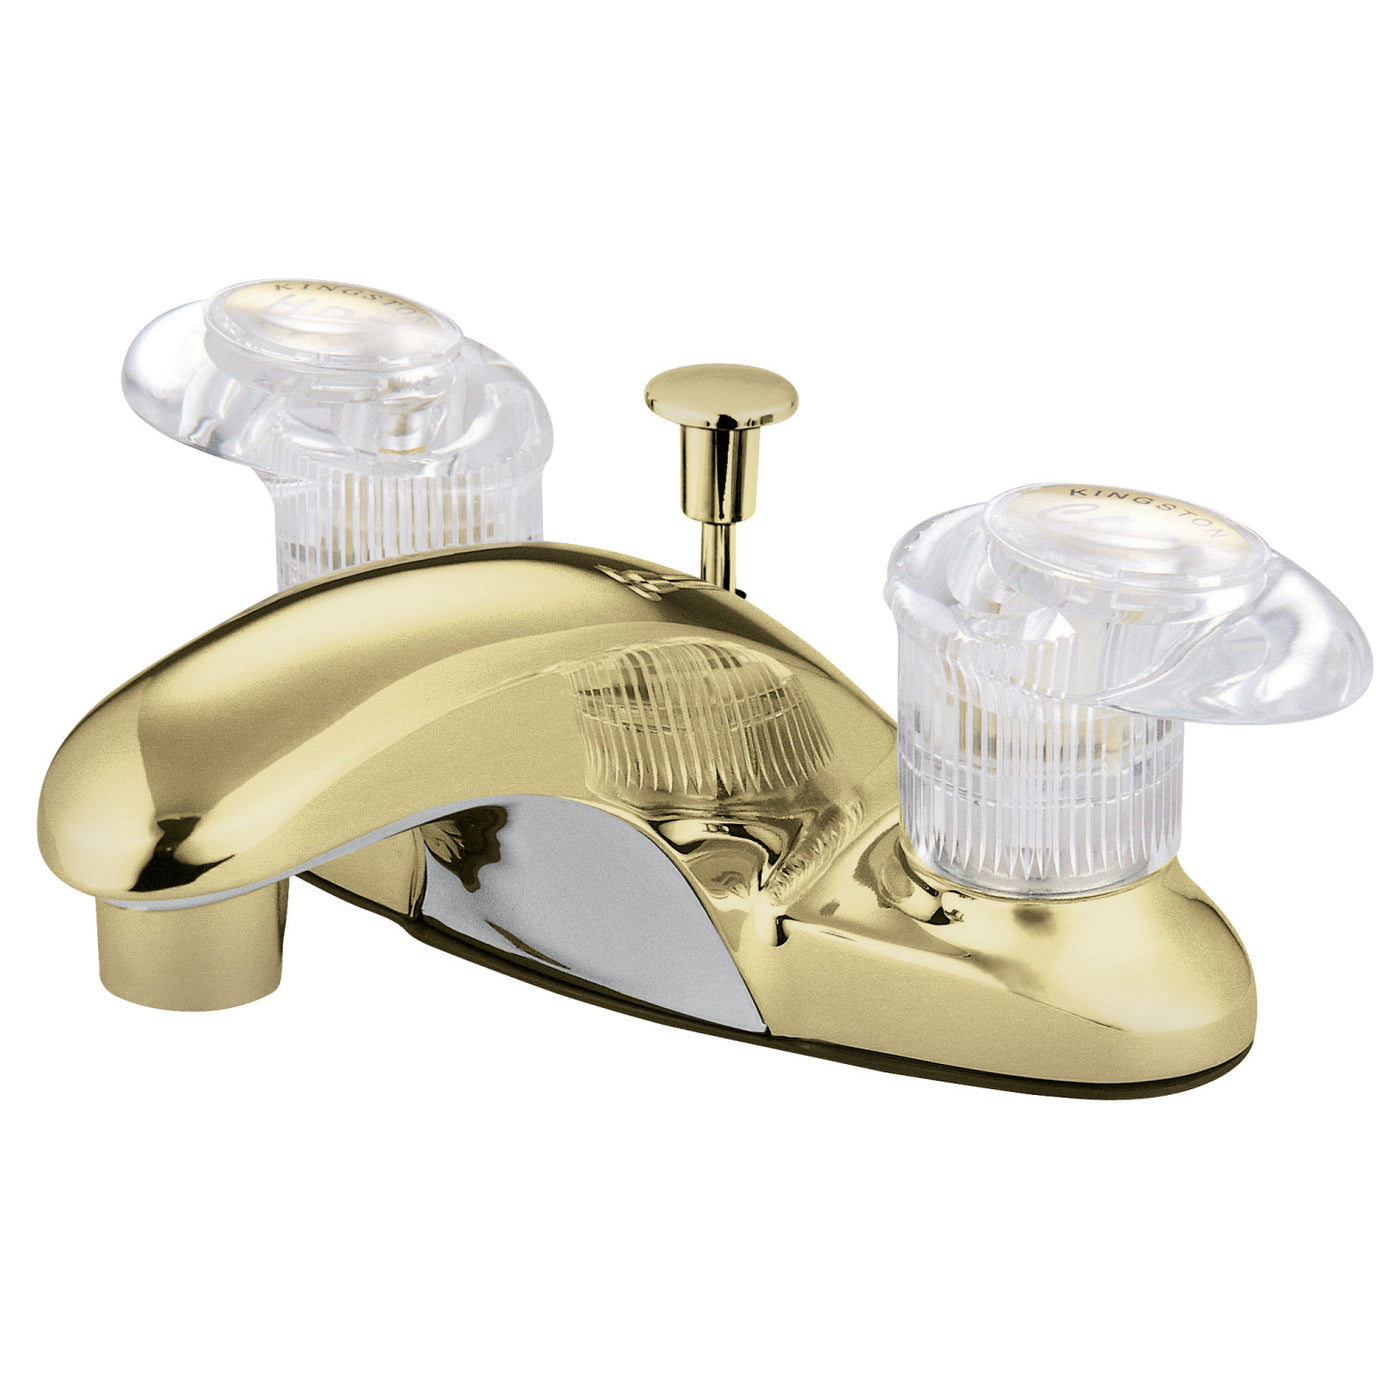 Elements of Design EB6152 4-Inch Centerset Bathroom Faucet, Polished Brass